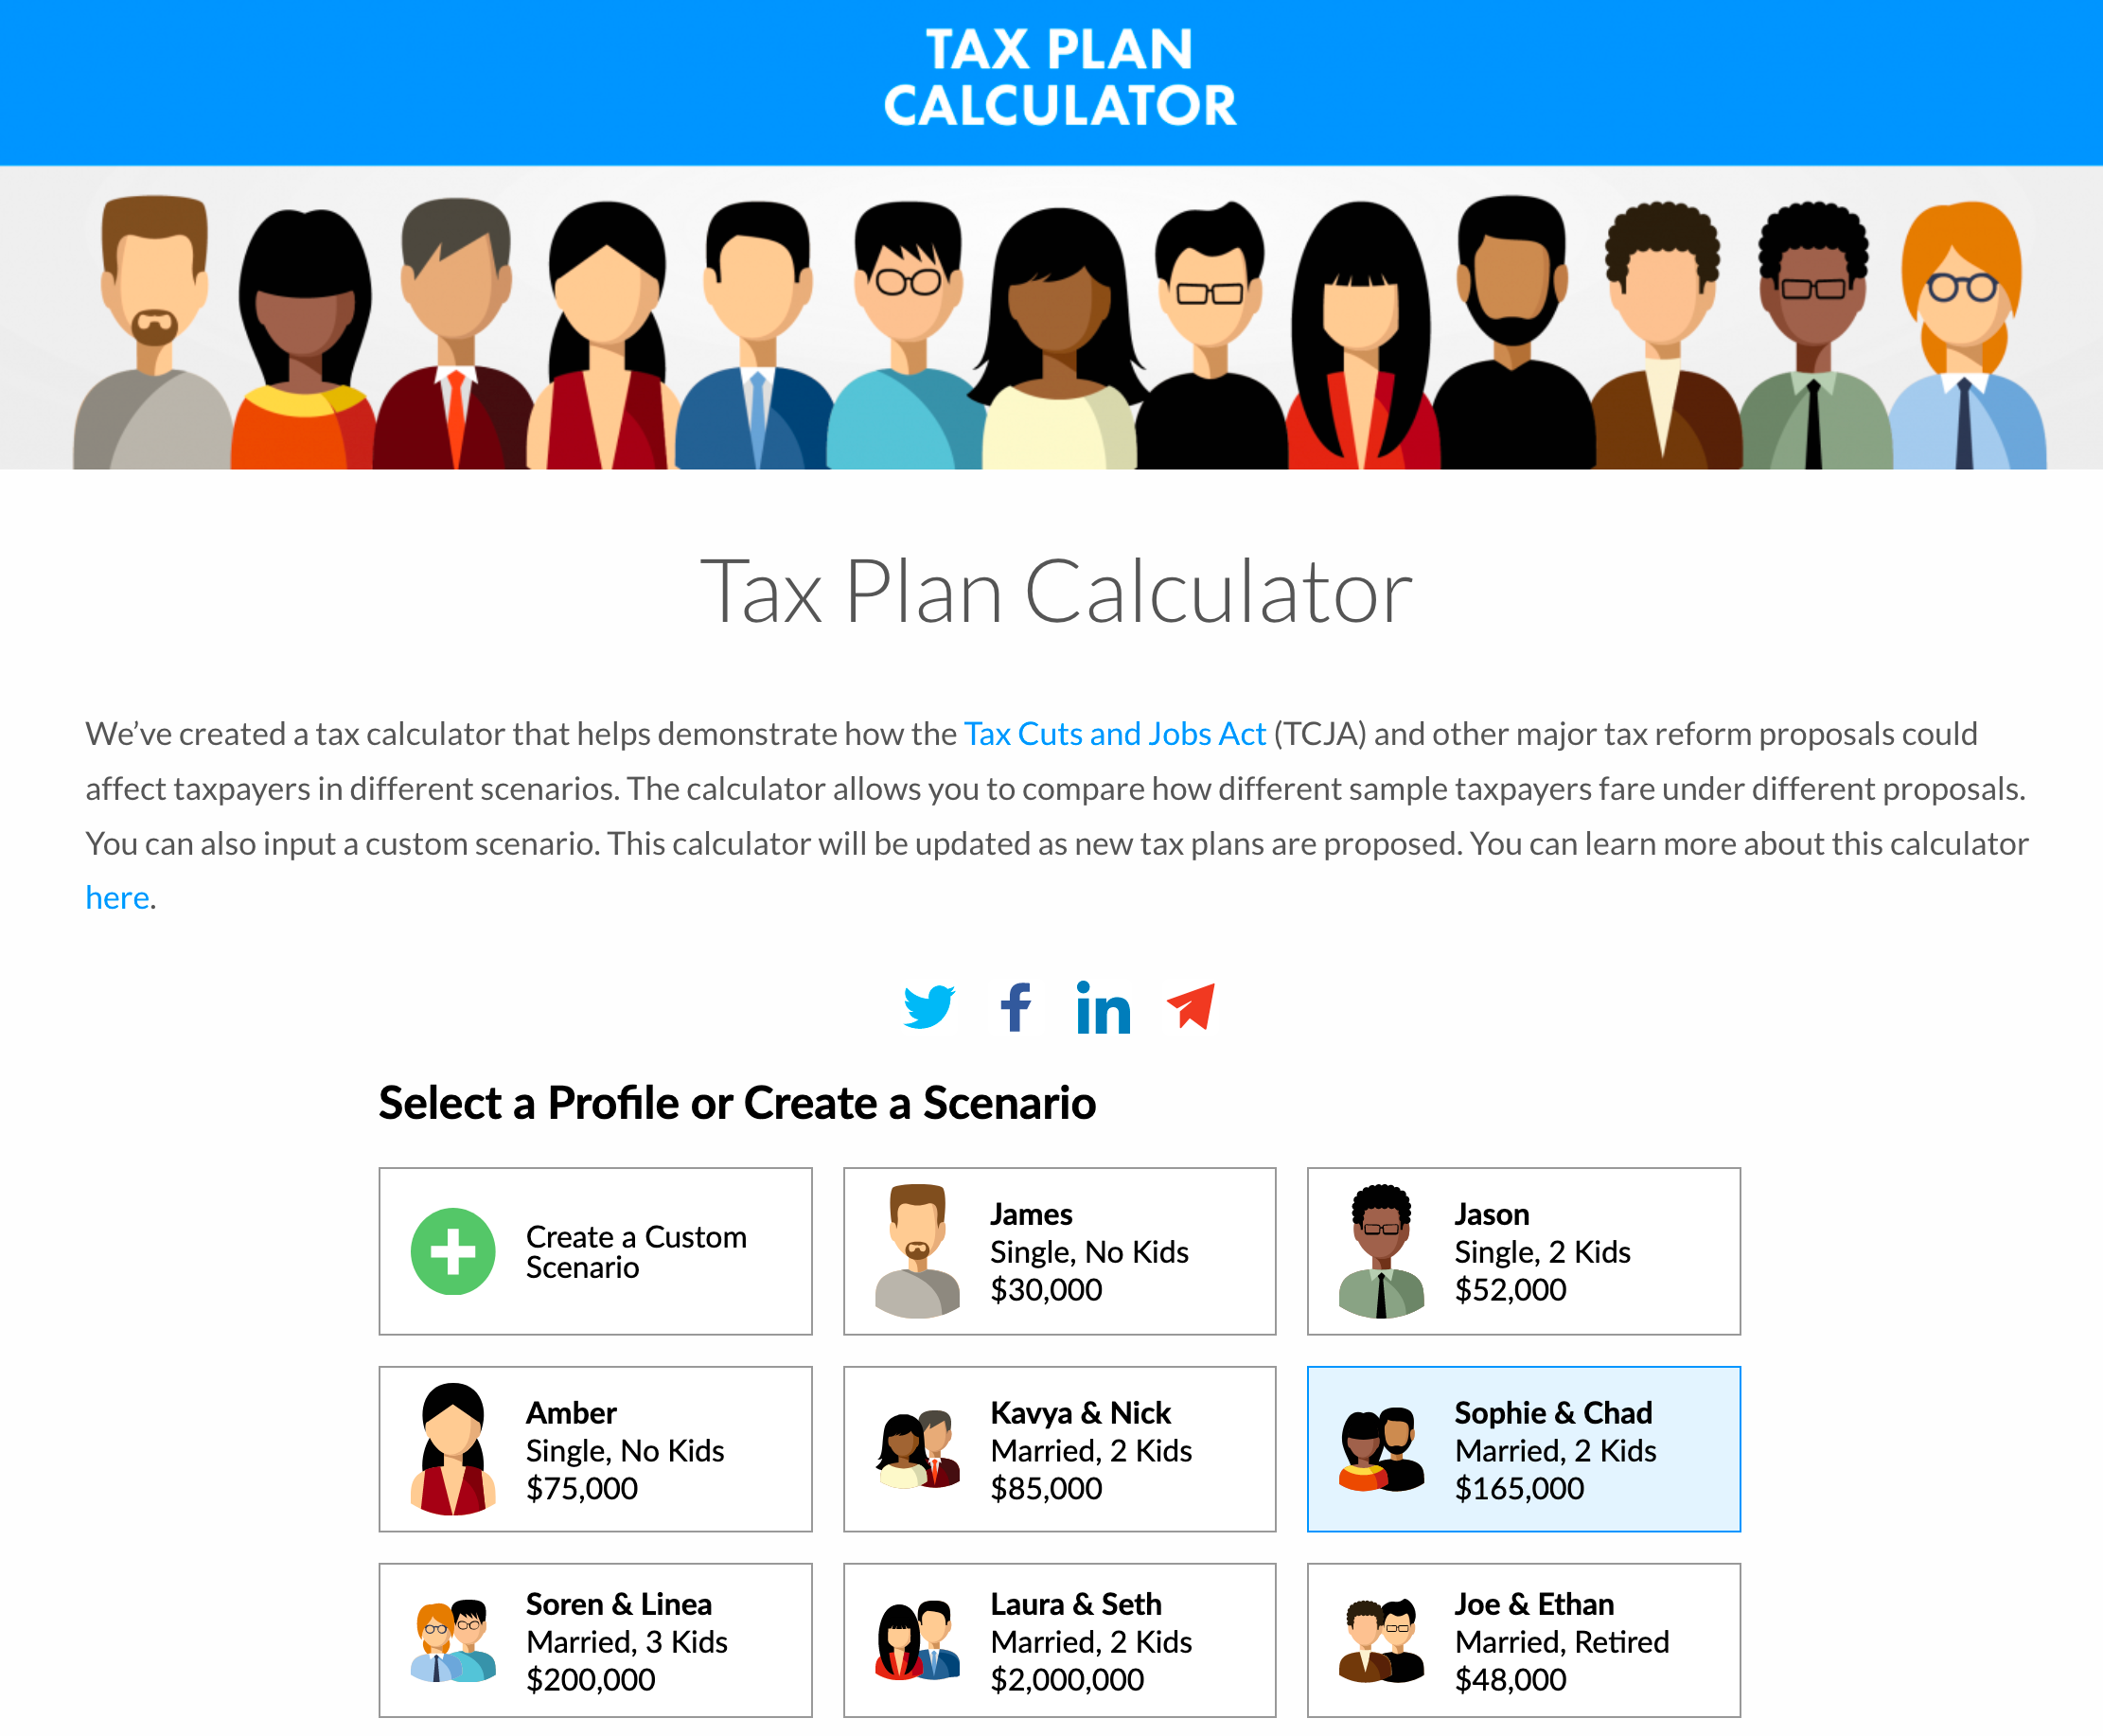 The tax plan calculator as viewed on taxfoundation.org.